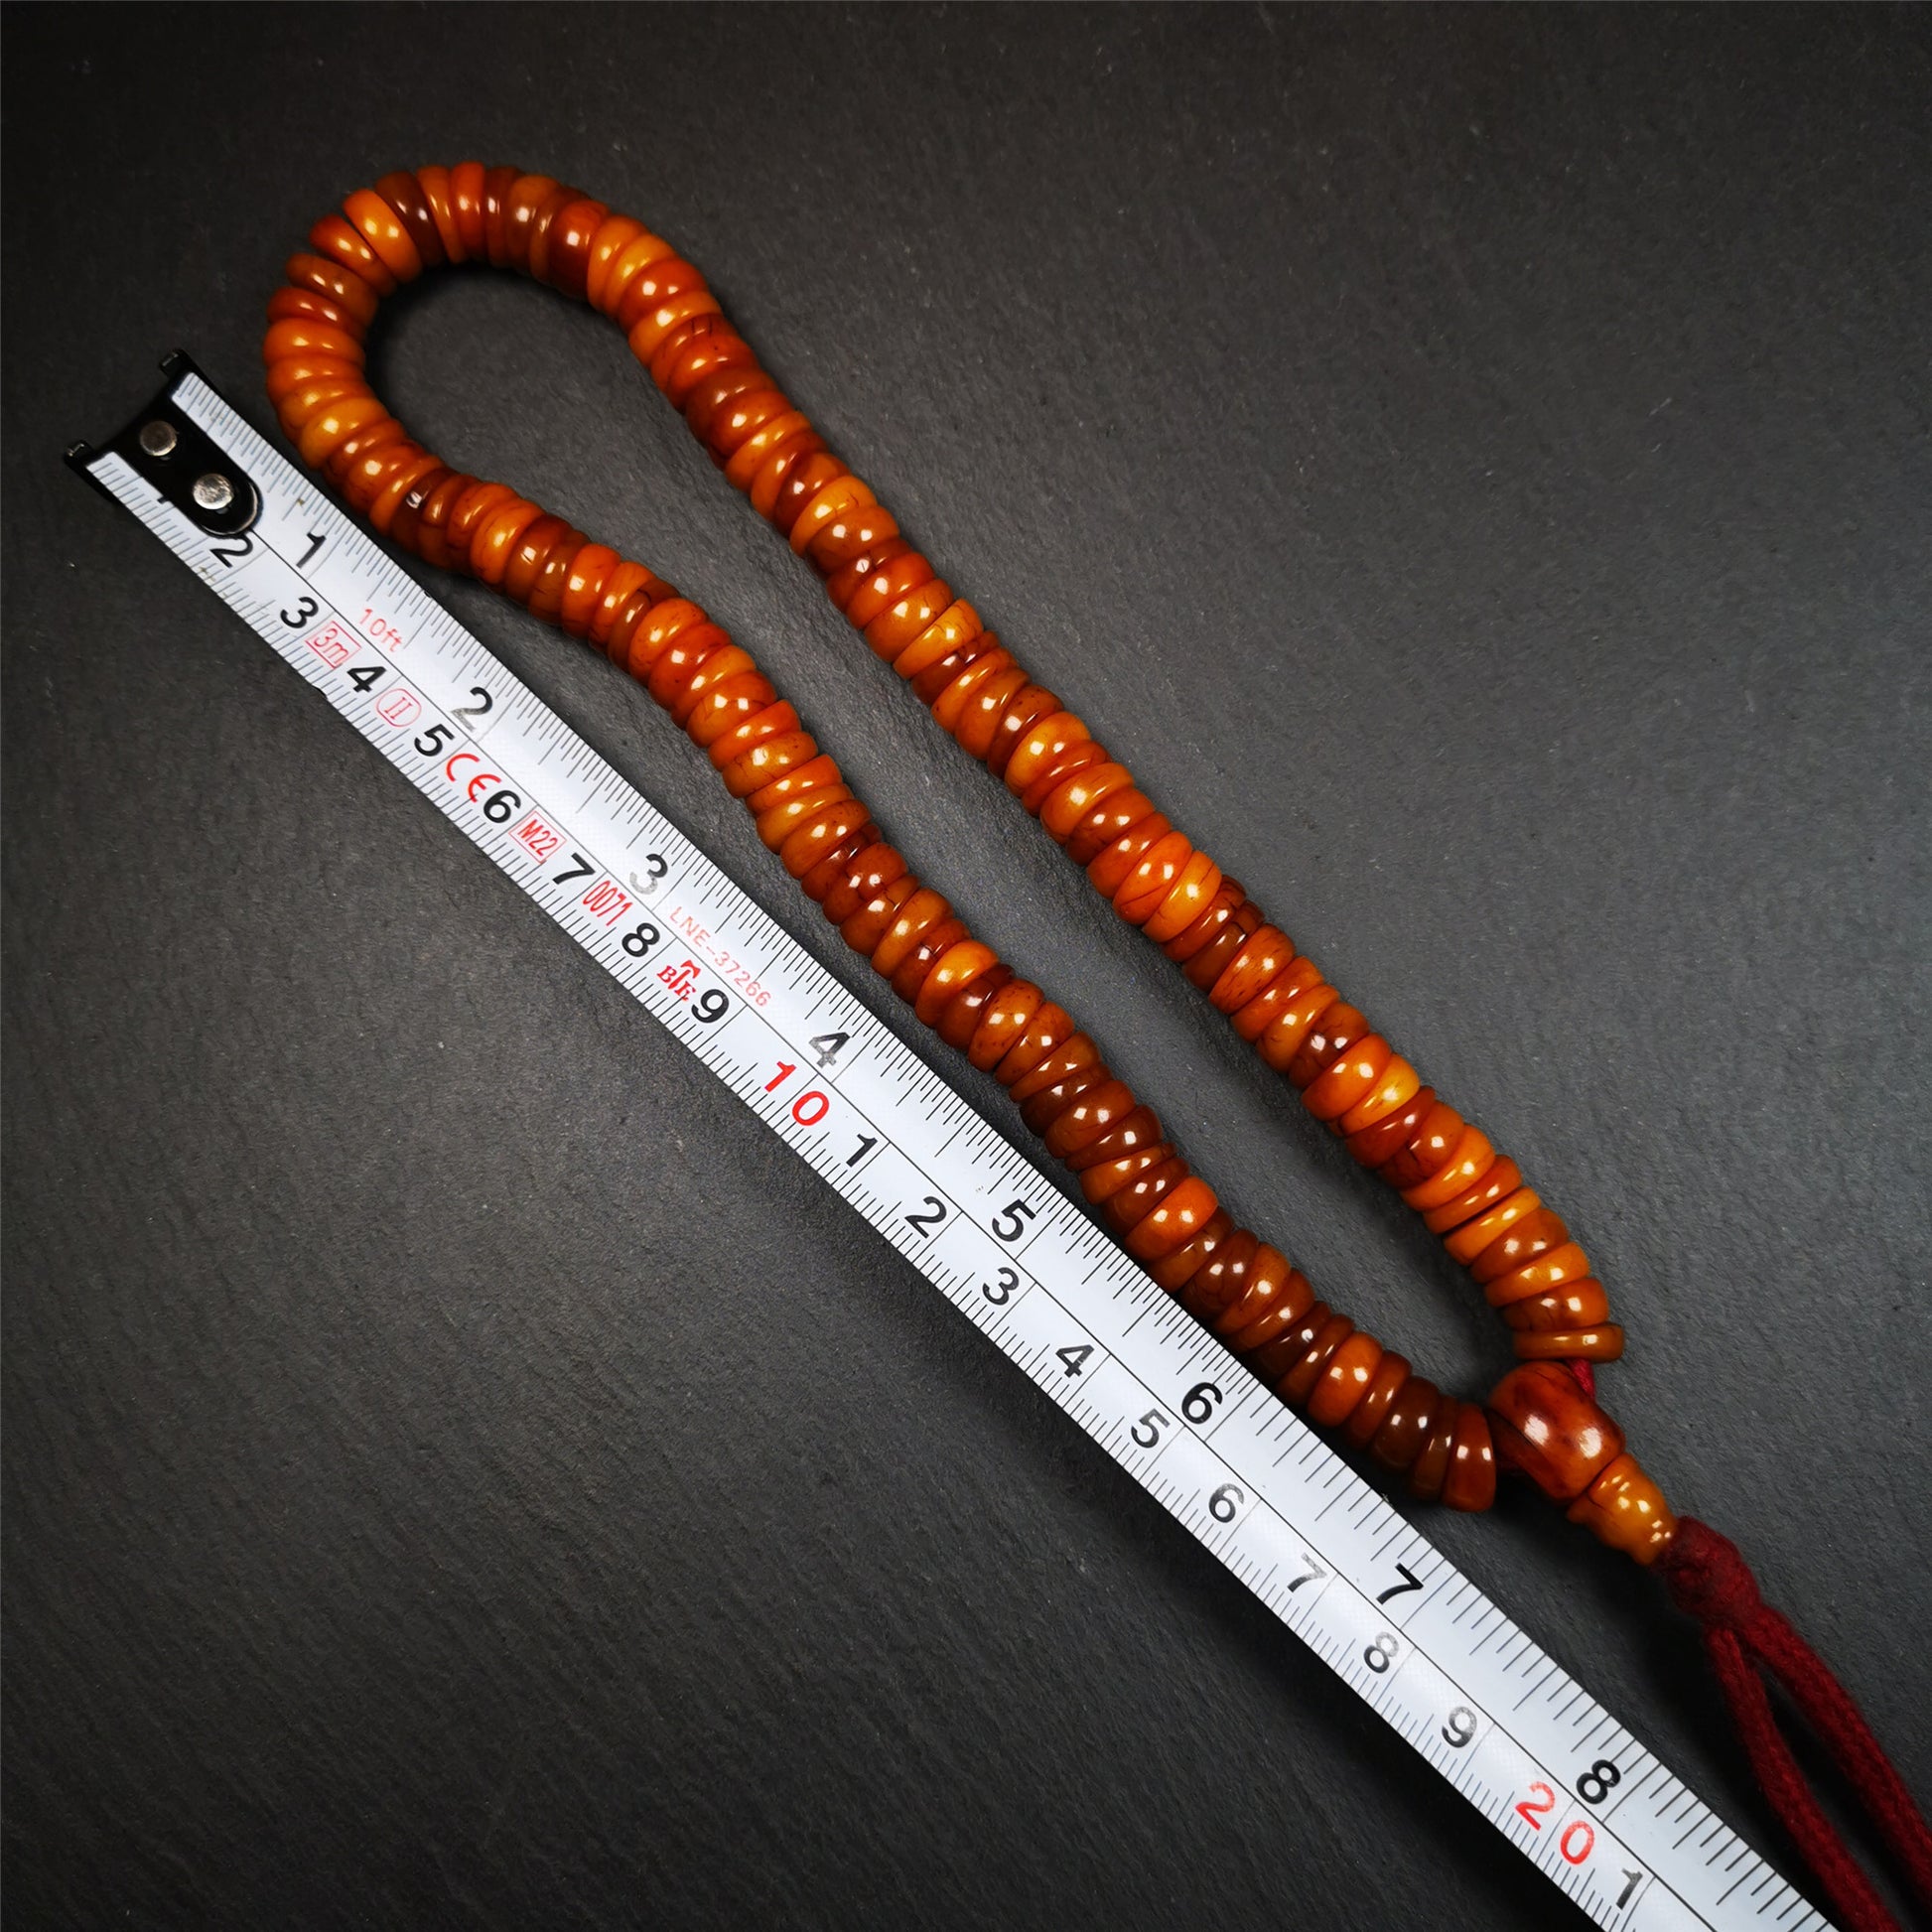 This bone carved mala beads is made by Tibetan,about 30 years Old. It has 108 wave shape beads,1 guru bead,all hand carved with tibetan yak bone. It reflects the original ascetic state of the original ecology, very simple and full of sense of time